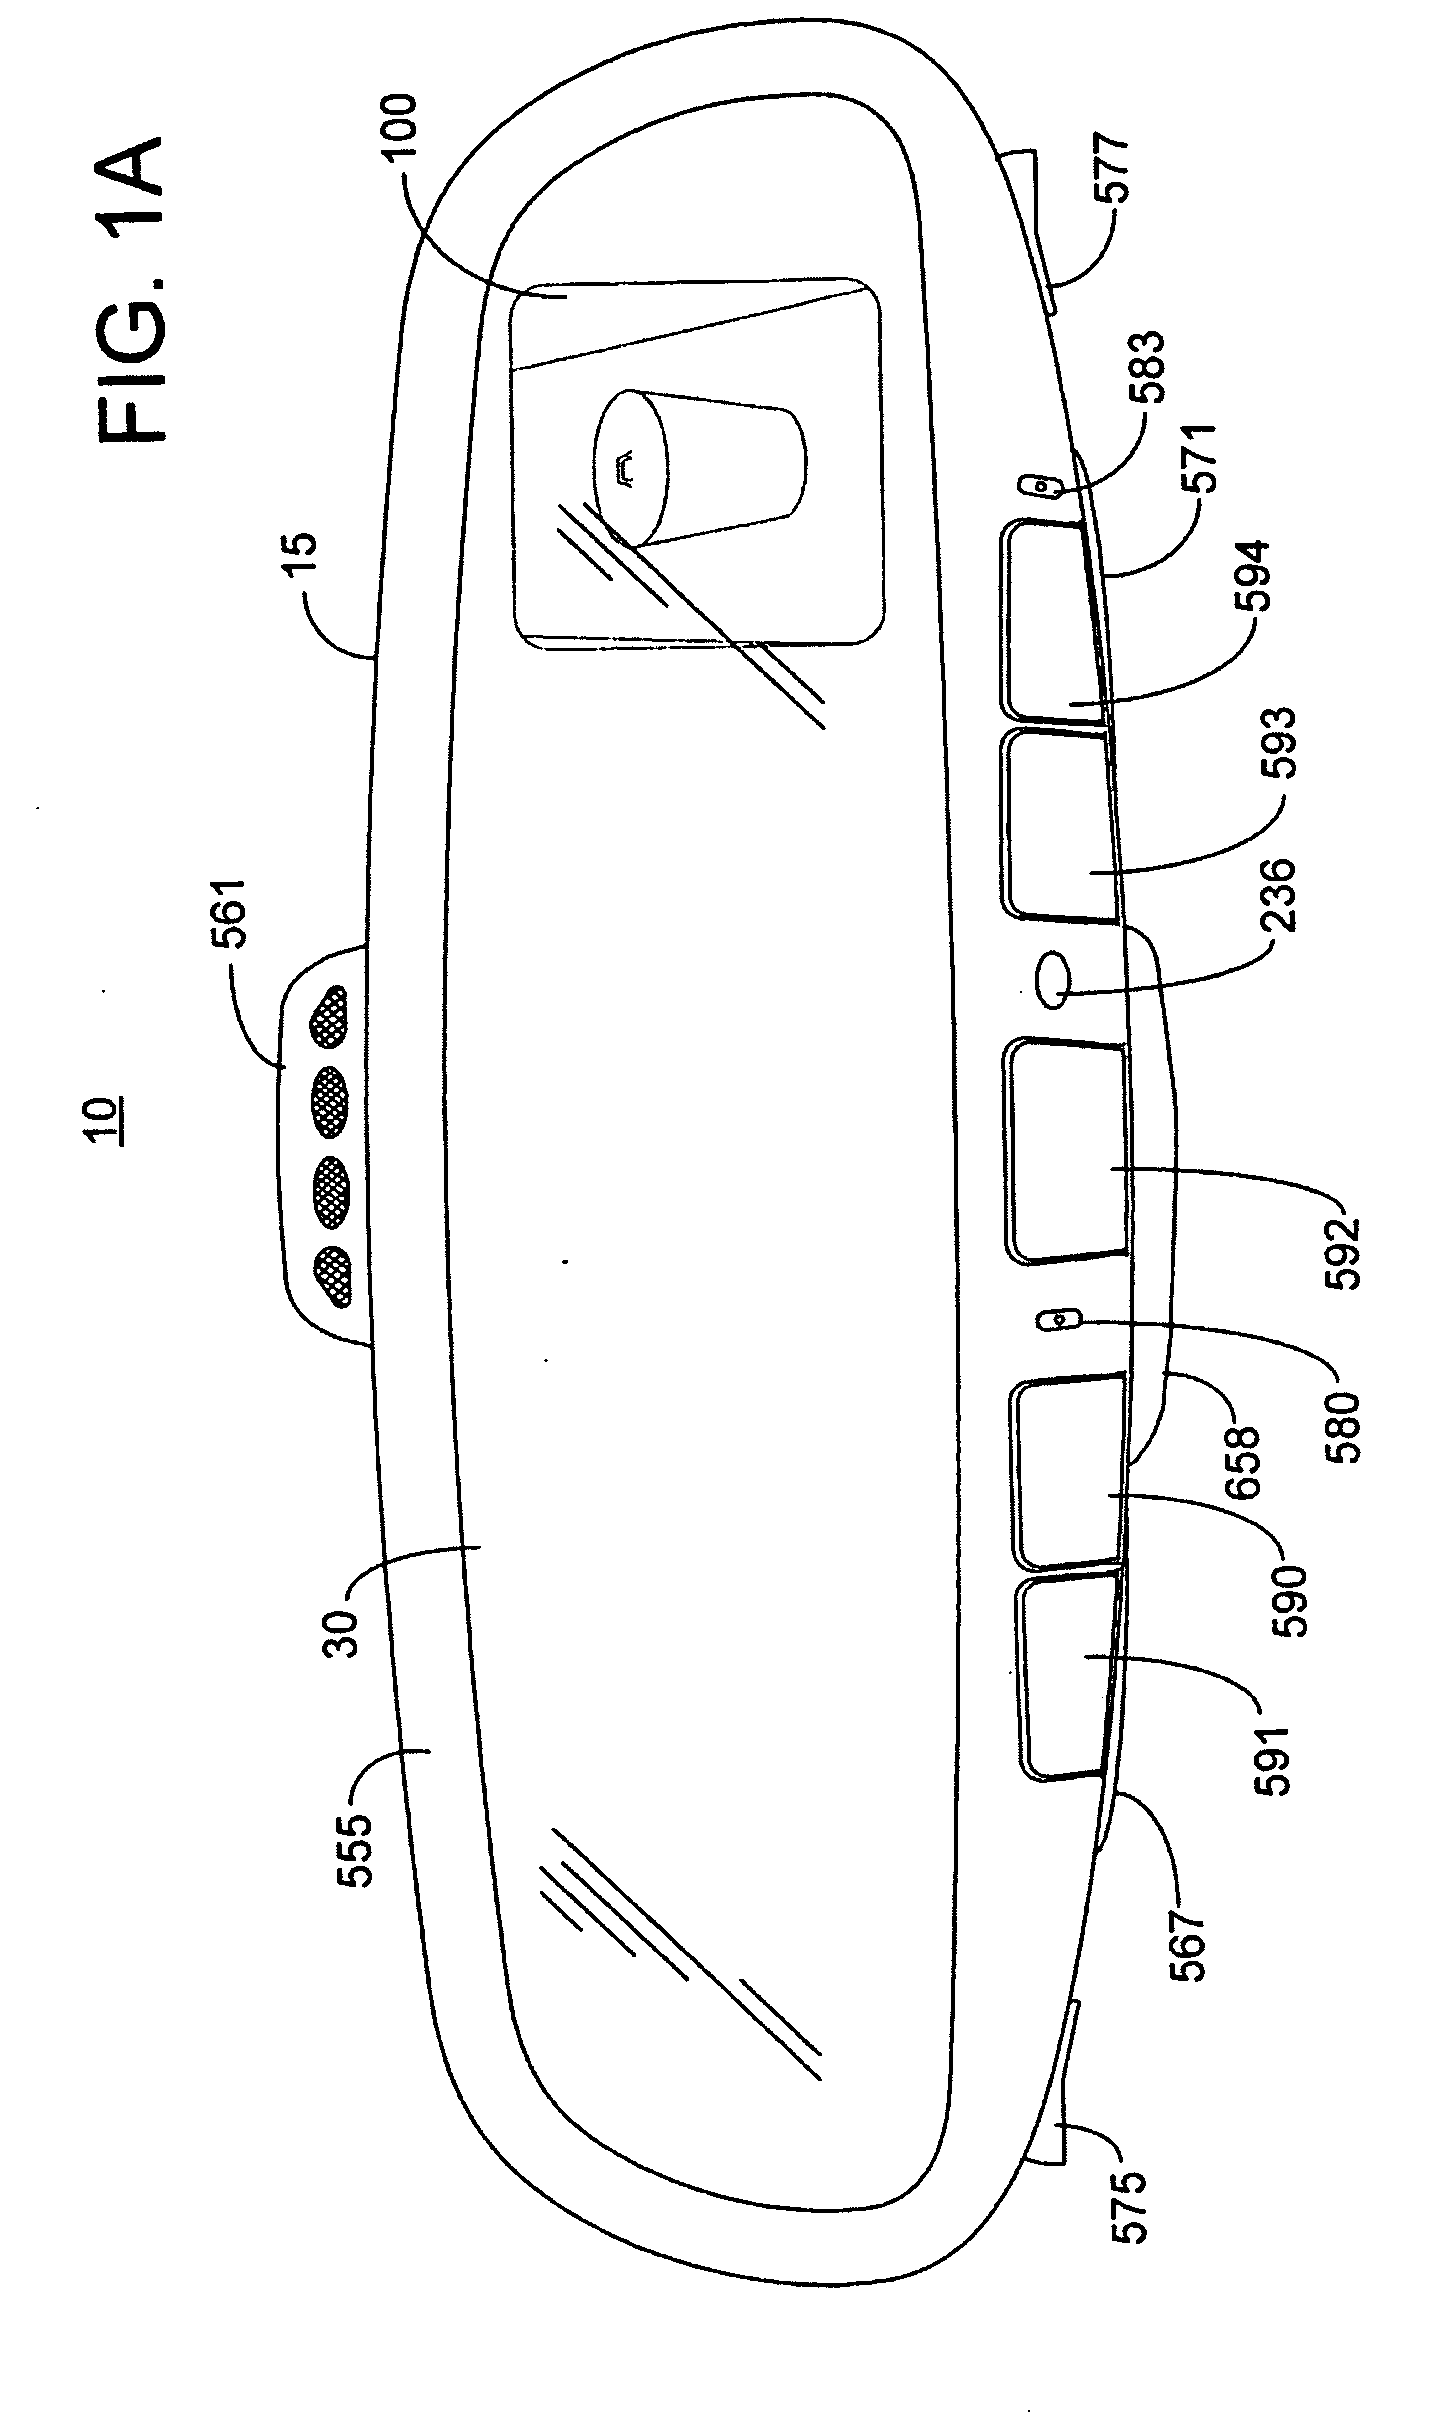 Vehicle Rearview Assembly Including a Display for Displaying Video Captured by a Camera and User Instructions